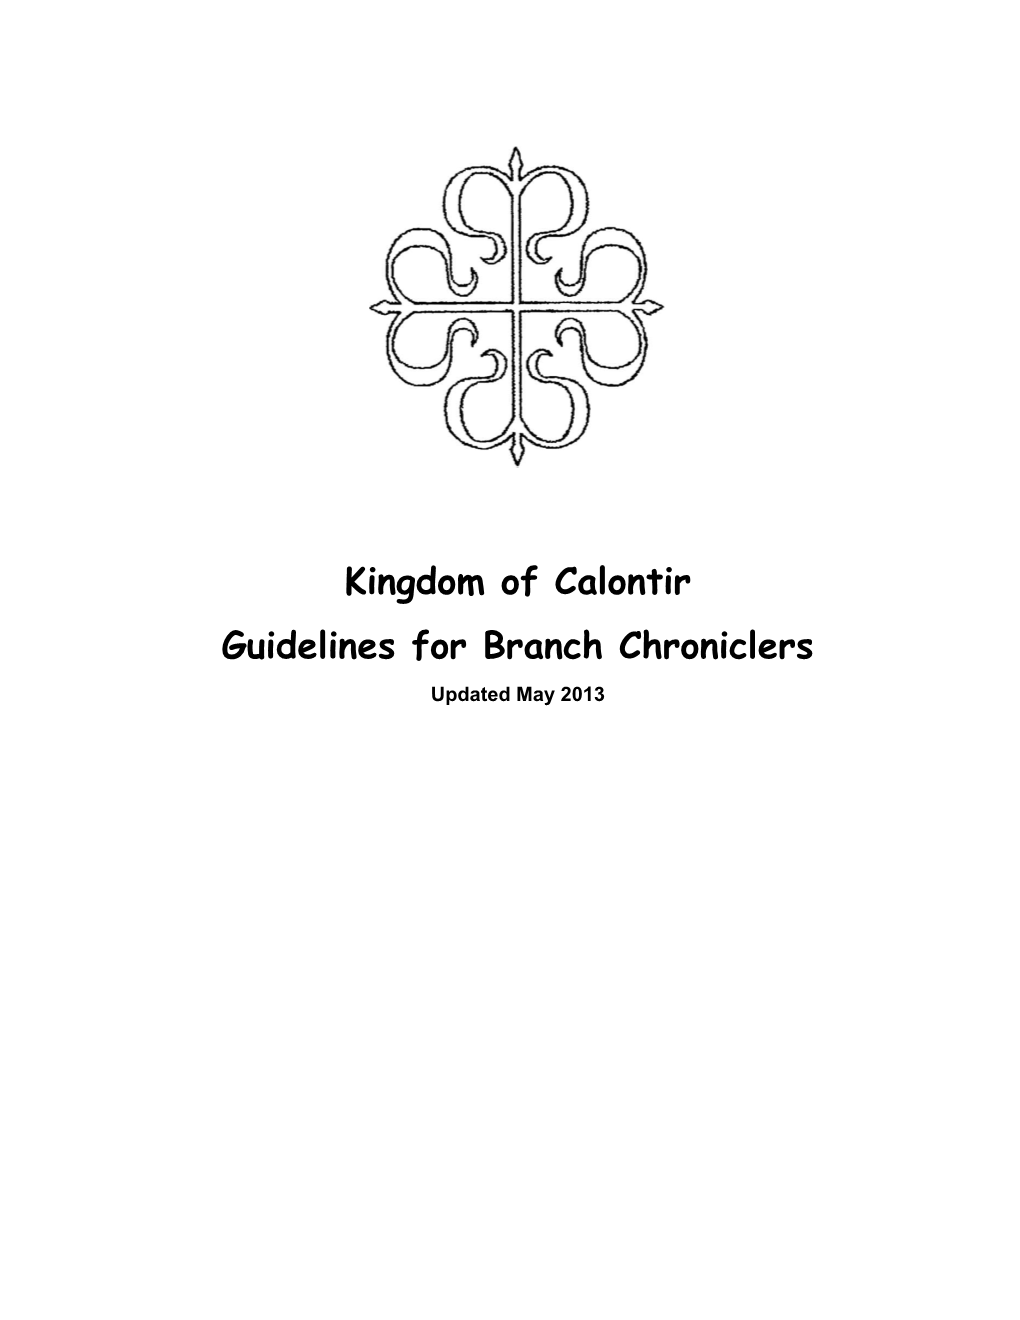 Guidelines for Branch Chroniclers